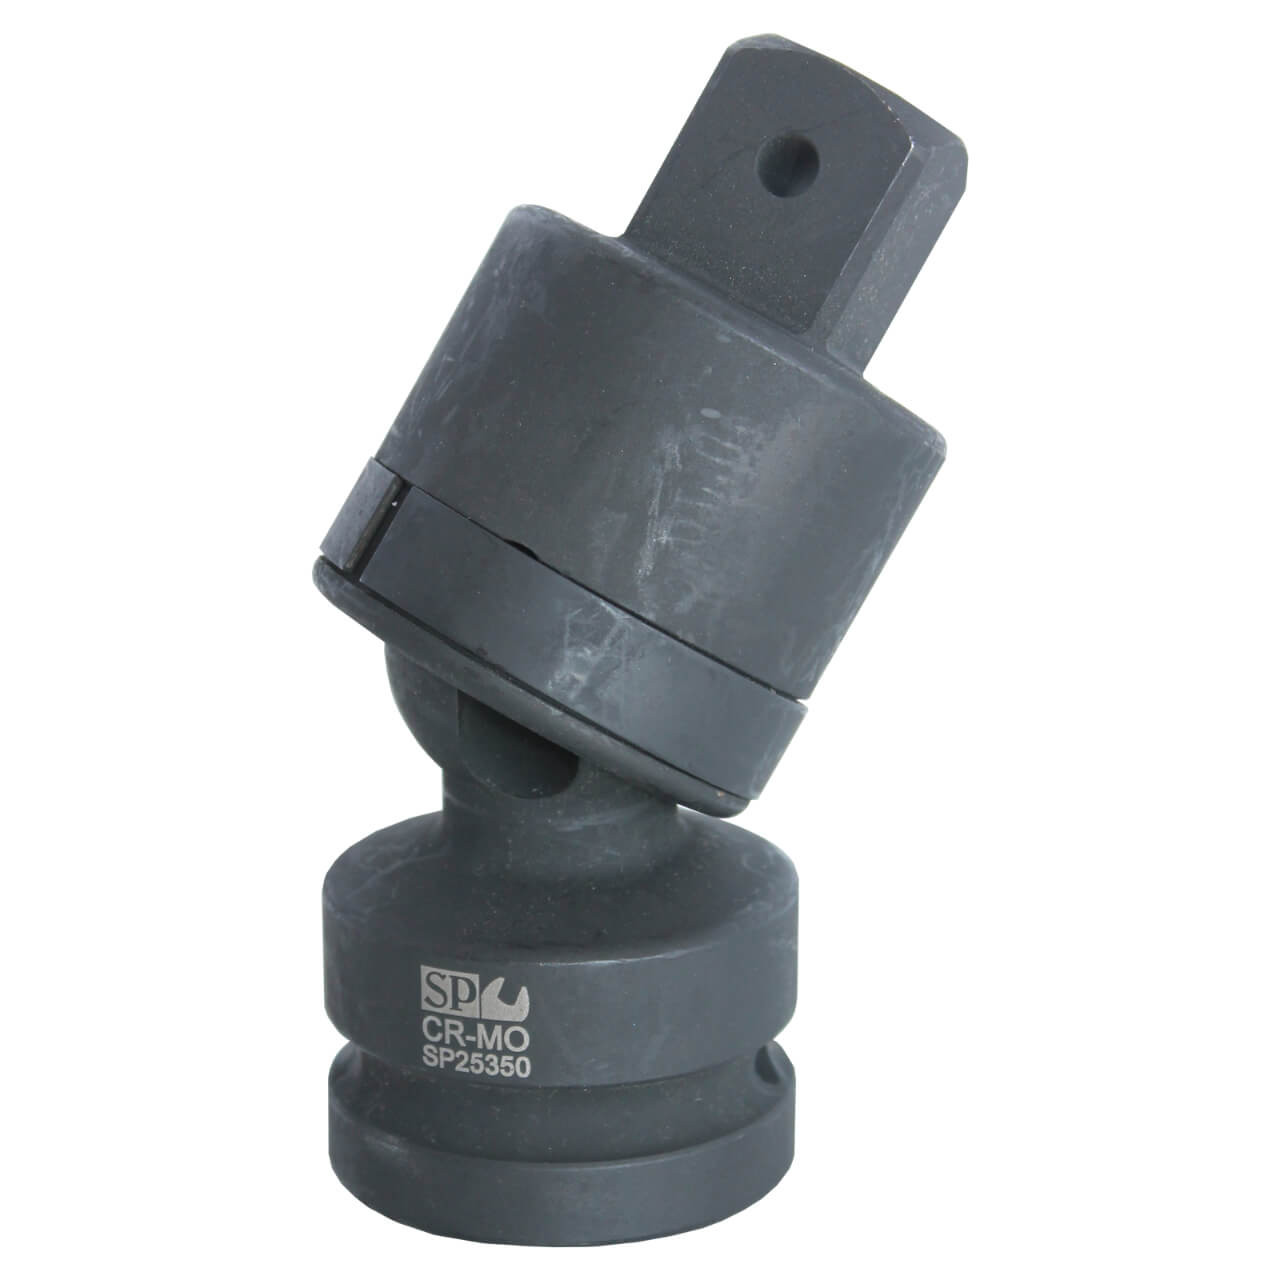 SP Tools 1” Impact Universal Joint